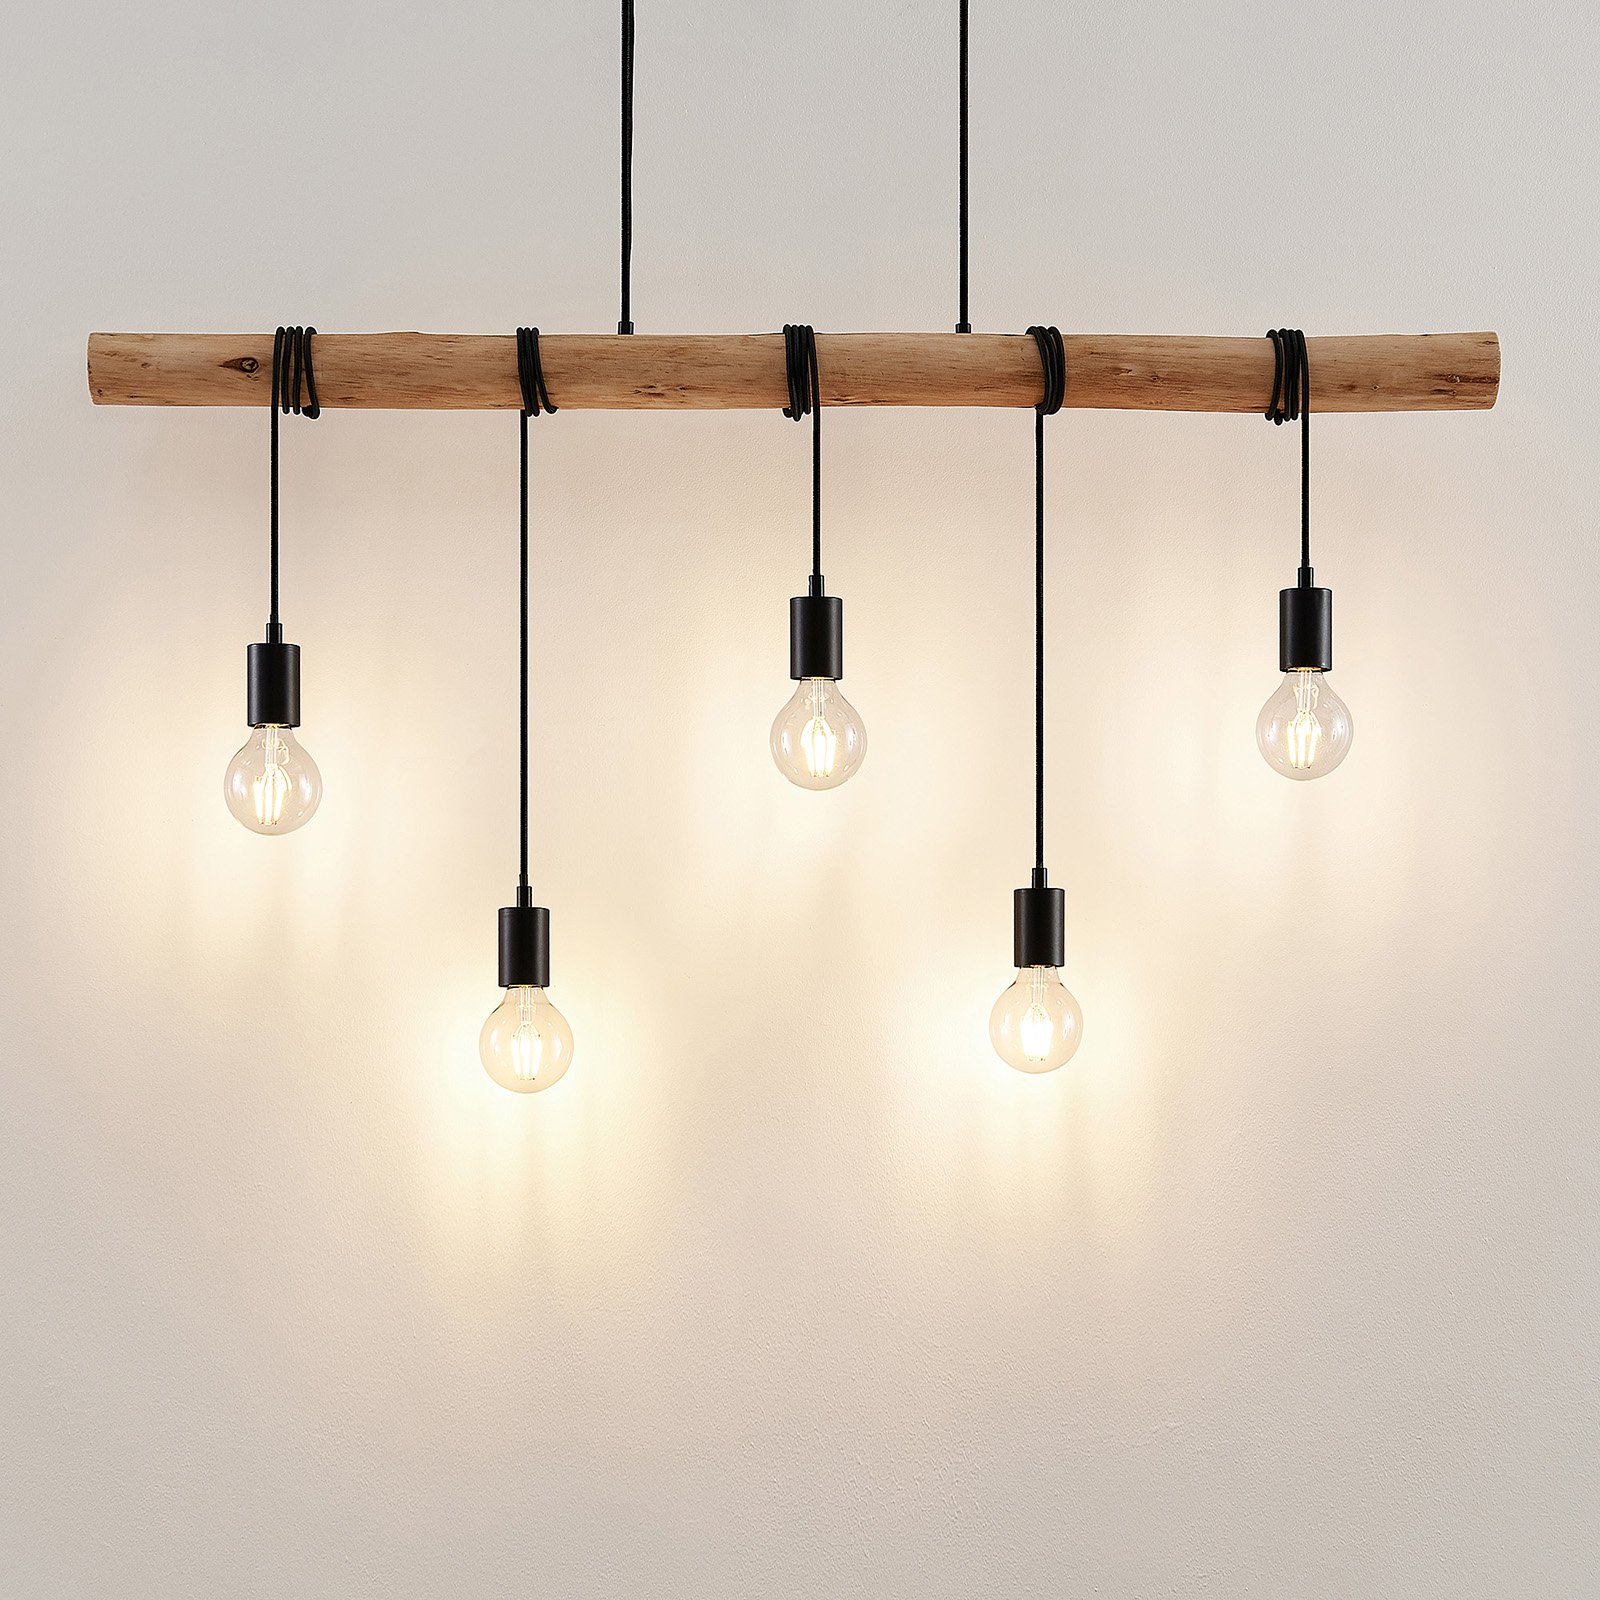 Hanglamp Rom, hout, 5-lamps